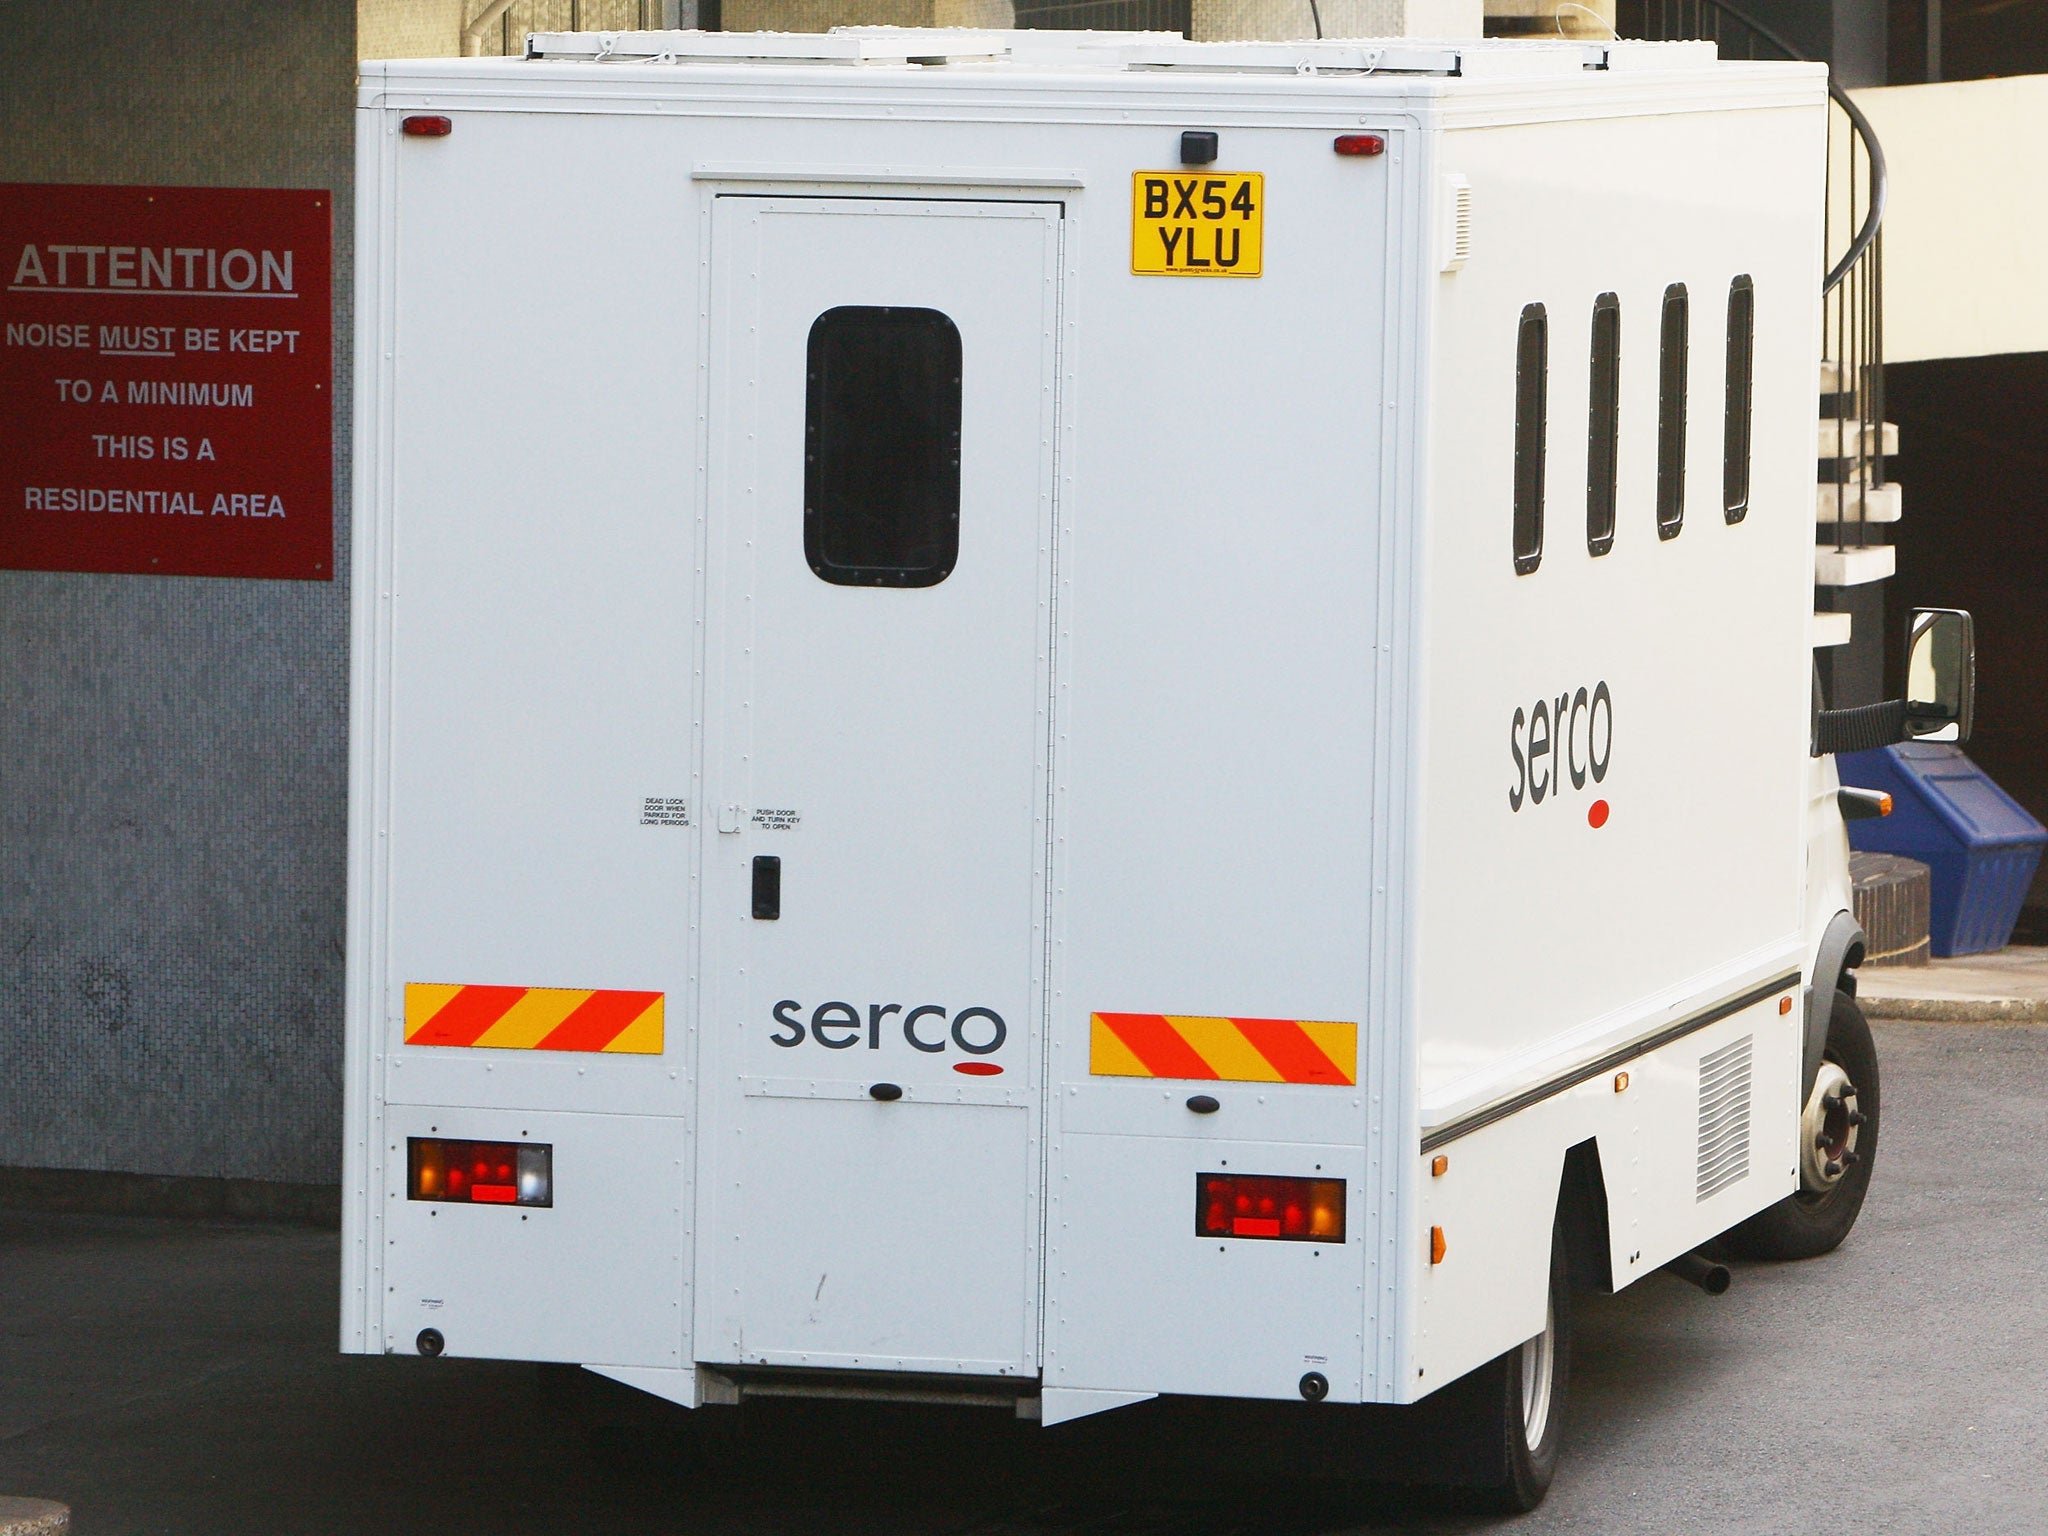 The Prisoner Escort and Custodial Services (PECS) contract is one of a gamut of public sector deals held in Britain by Serco